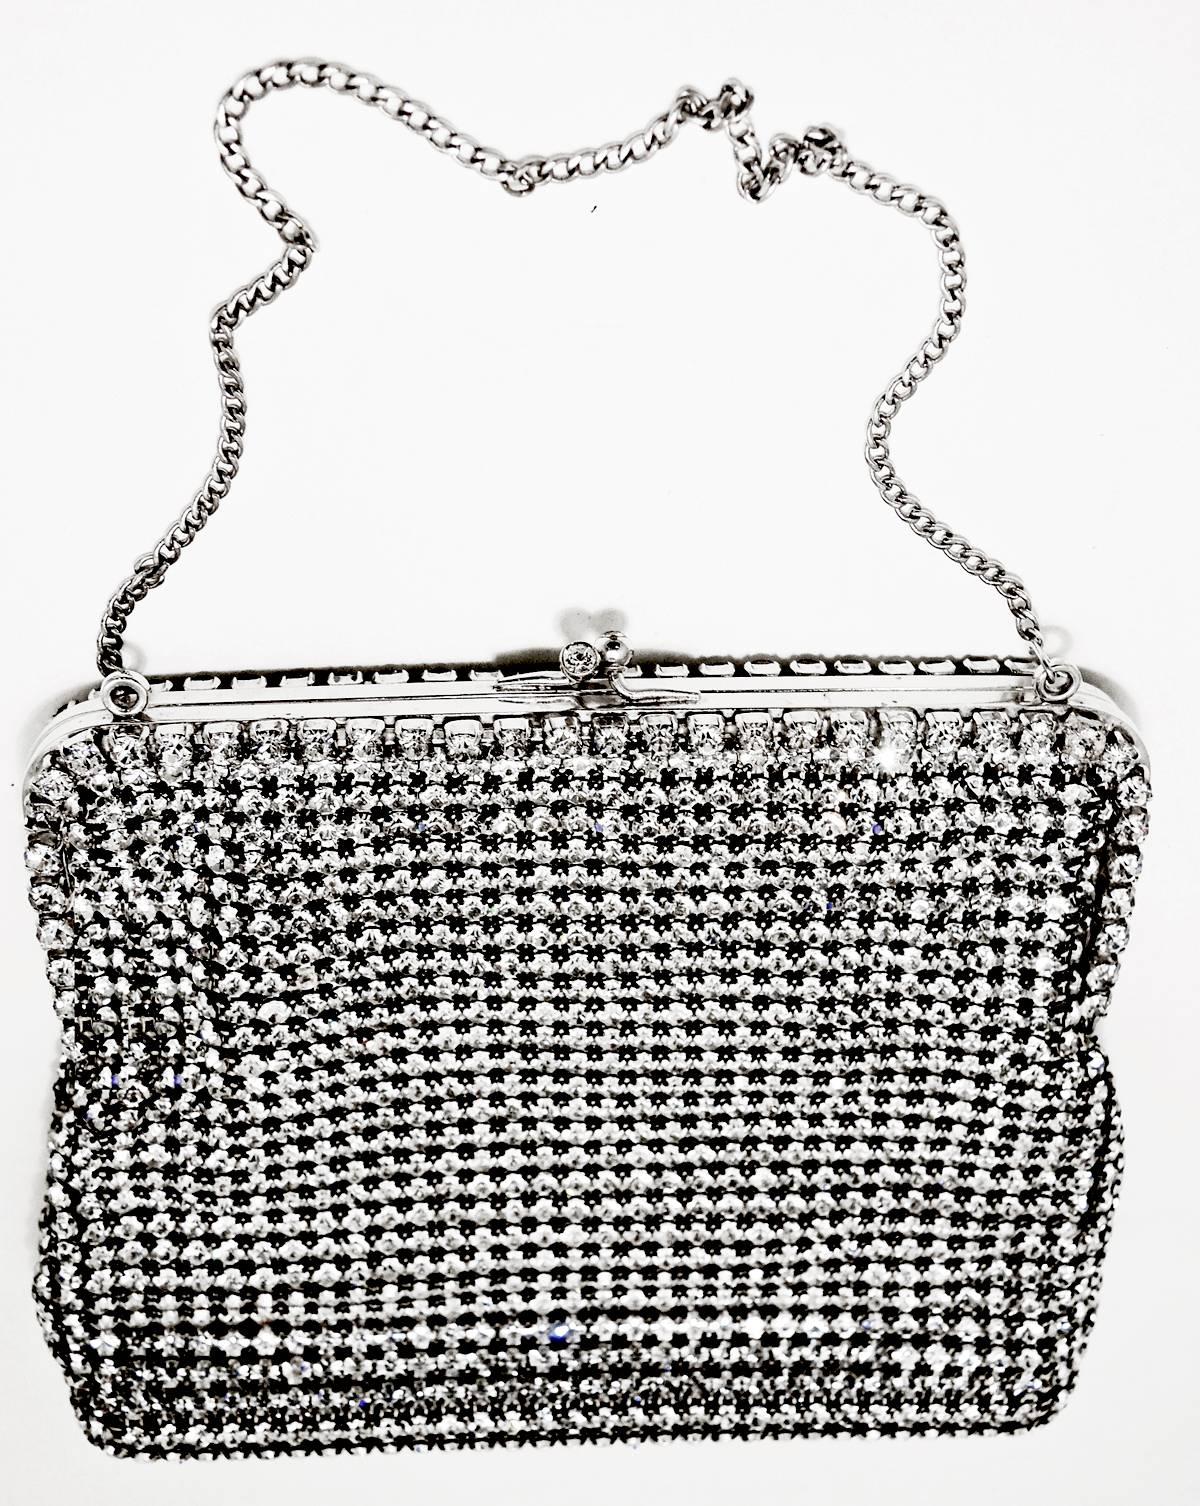 This Calem clutch purse is embellished with vibrant clear rhinestones throughout the bag. It has a rhinestone twist back clasp. It has the original mirror, change purse and two compartments to put your belongings in. The inside is made with a